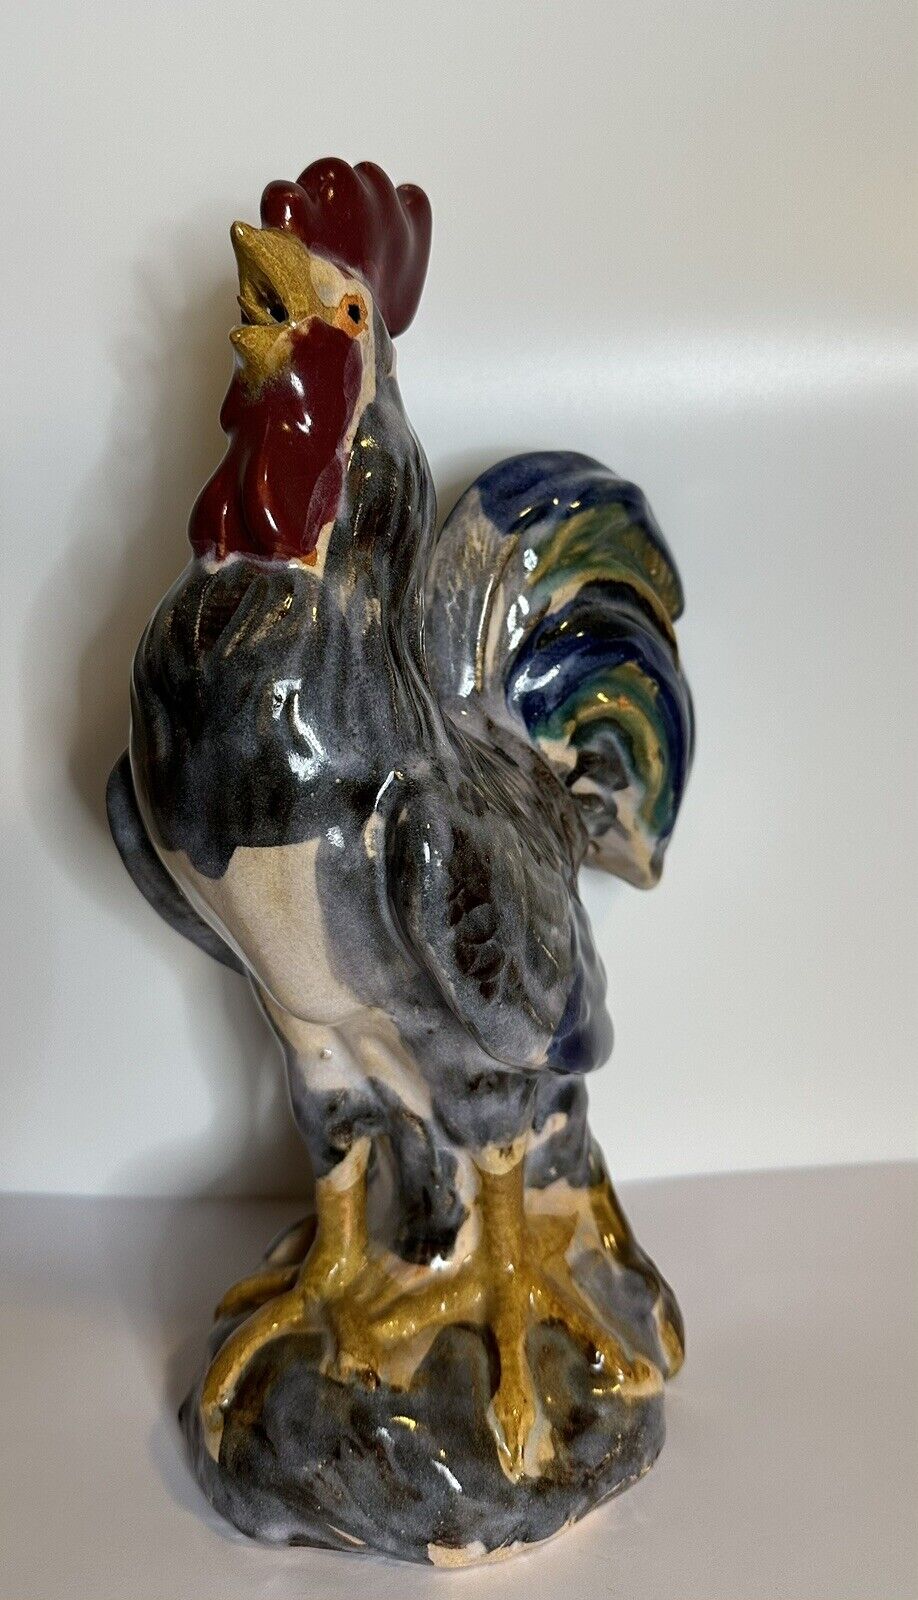 Vintage Majolica Hand-Painted Ceramic Rooster 12in